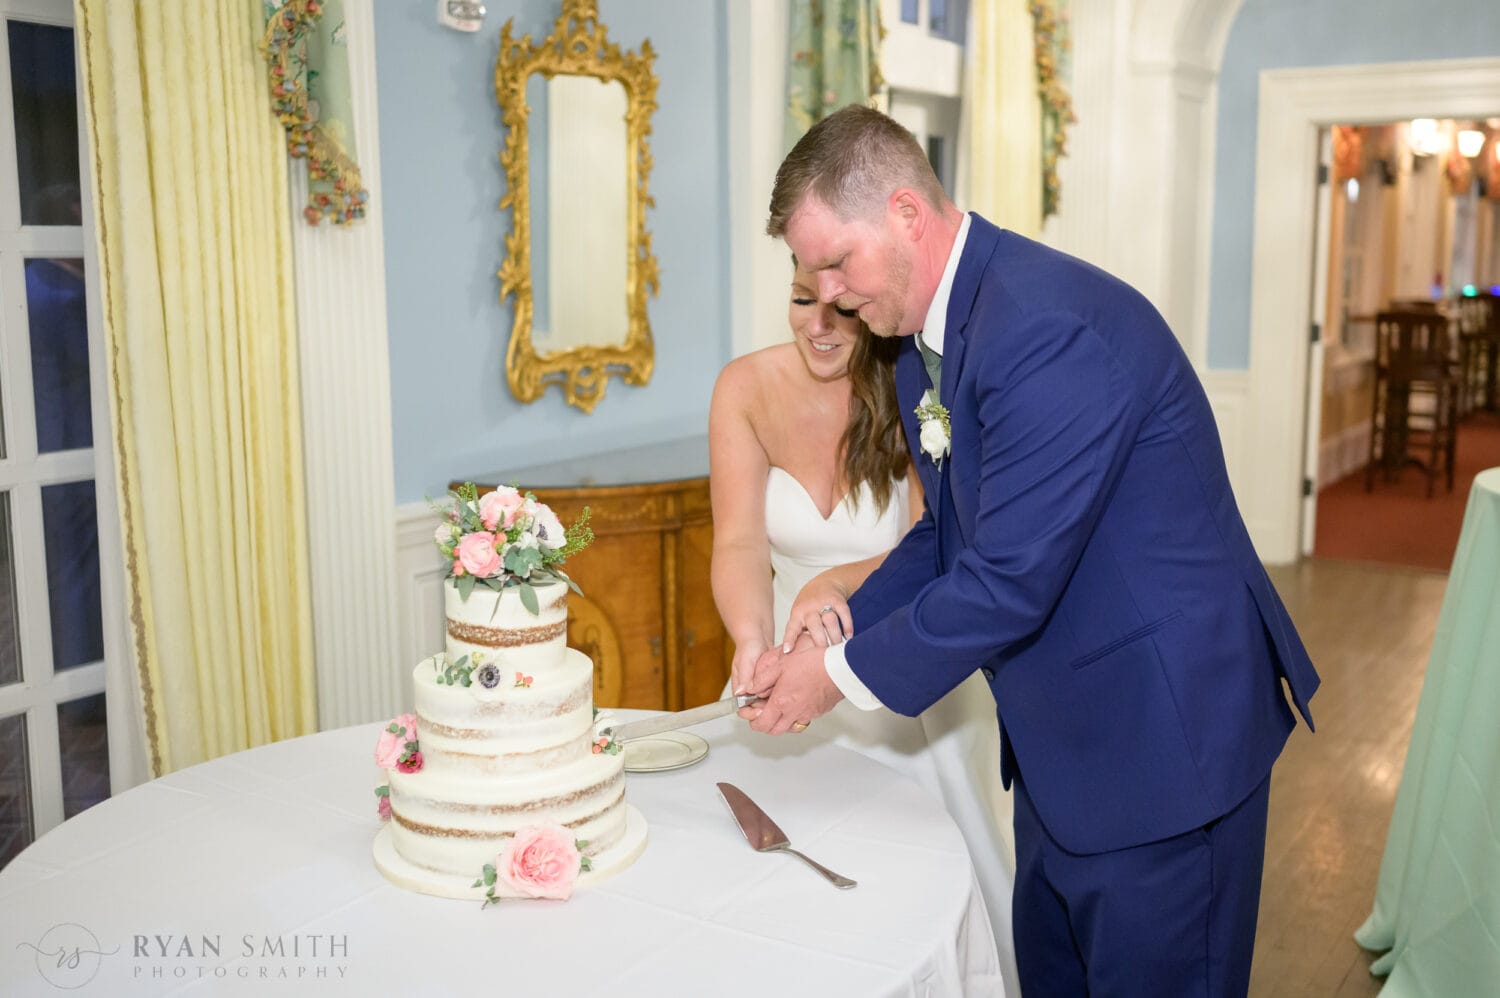 Cake cutting - Pine Lakes Country Club